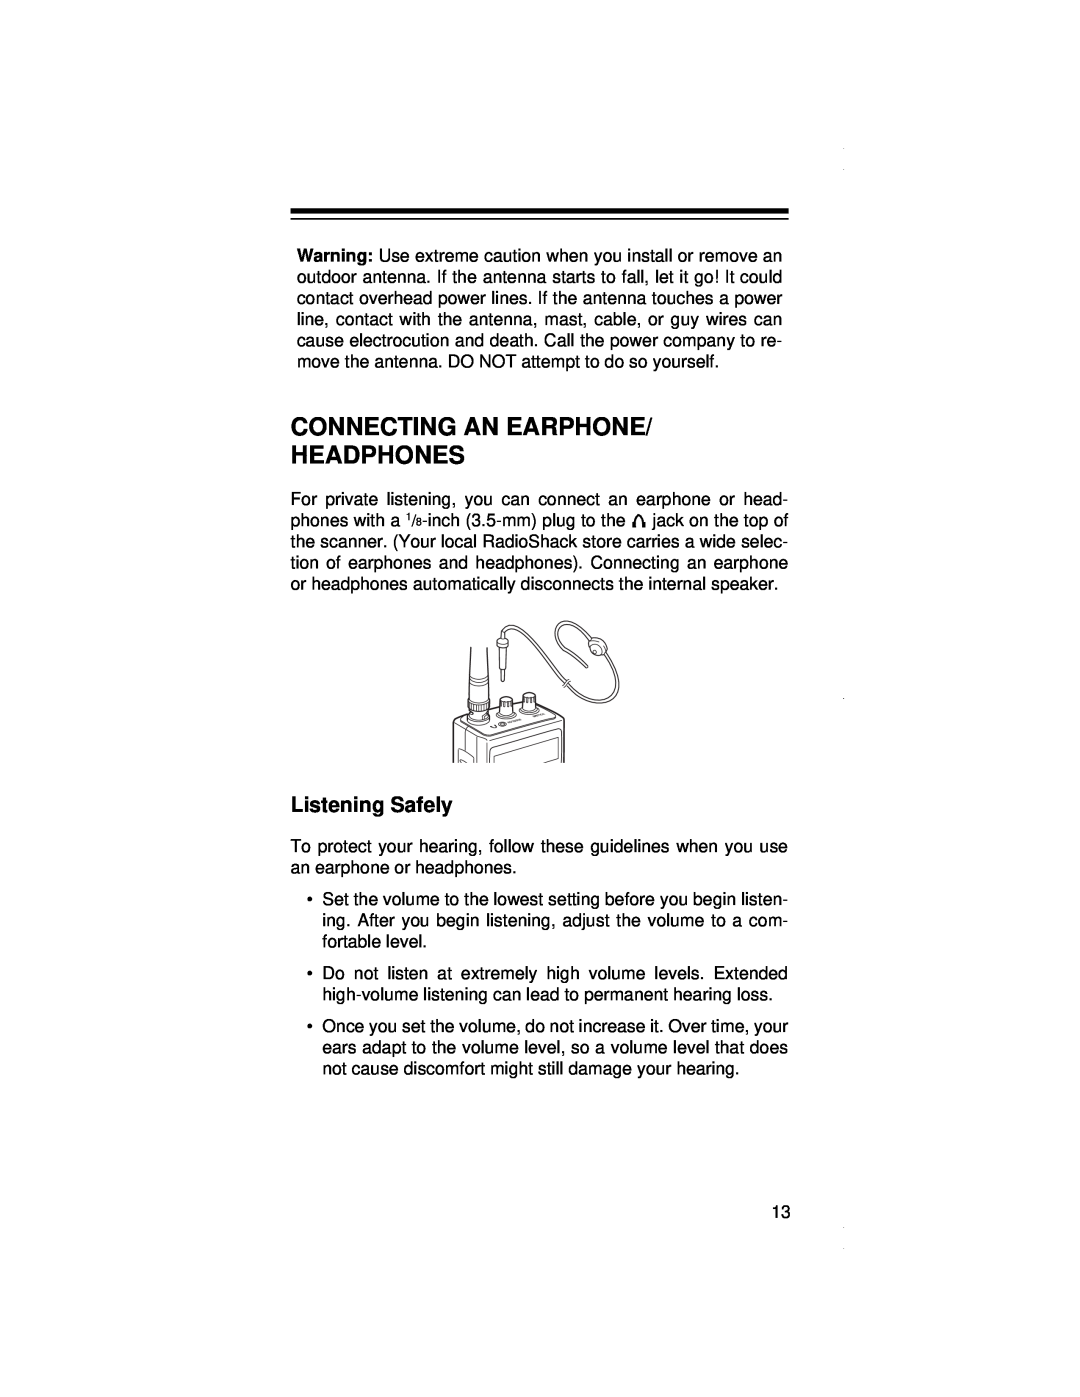 Radio Shack PRO-79 owner manual Connecting An Earphone Headphones, Listening Safely 